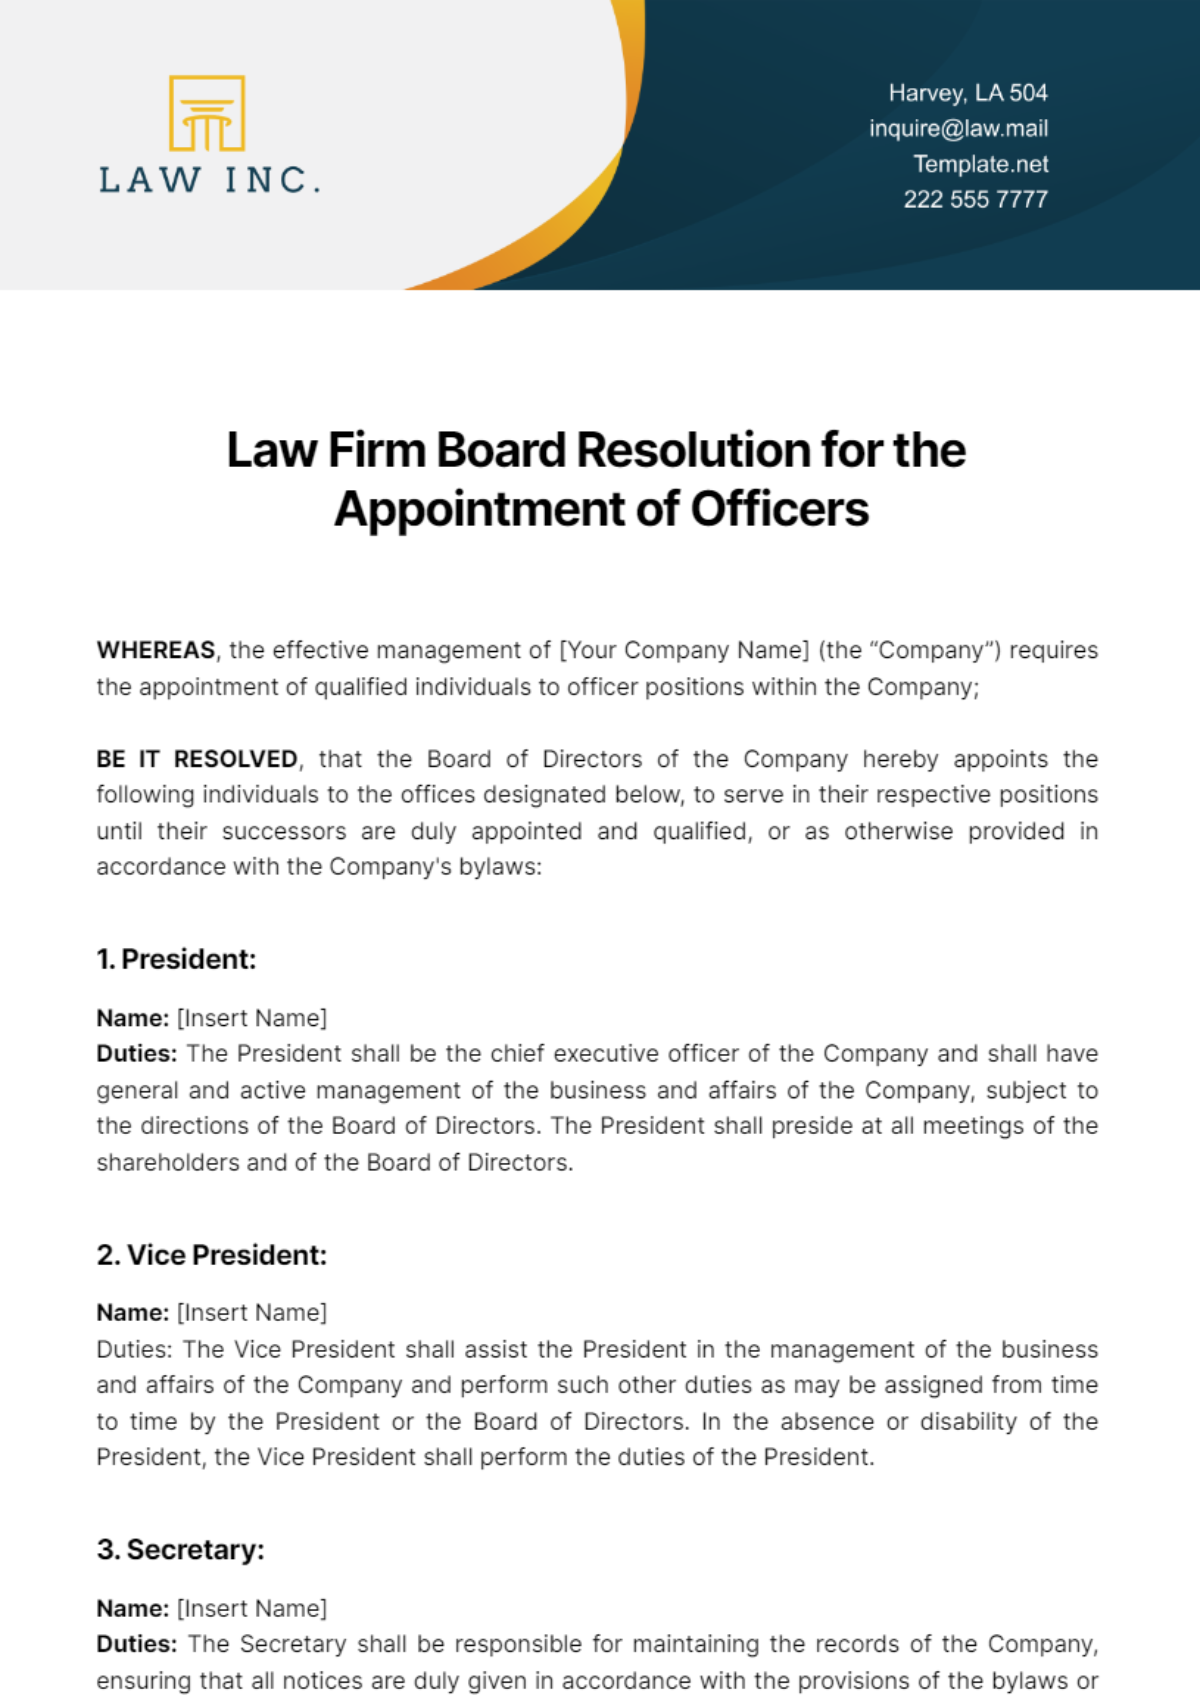 Law Firm Board Resolution for the Appointment of Officers Template